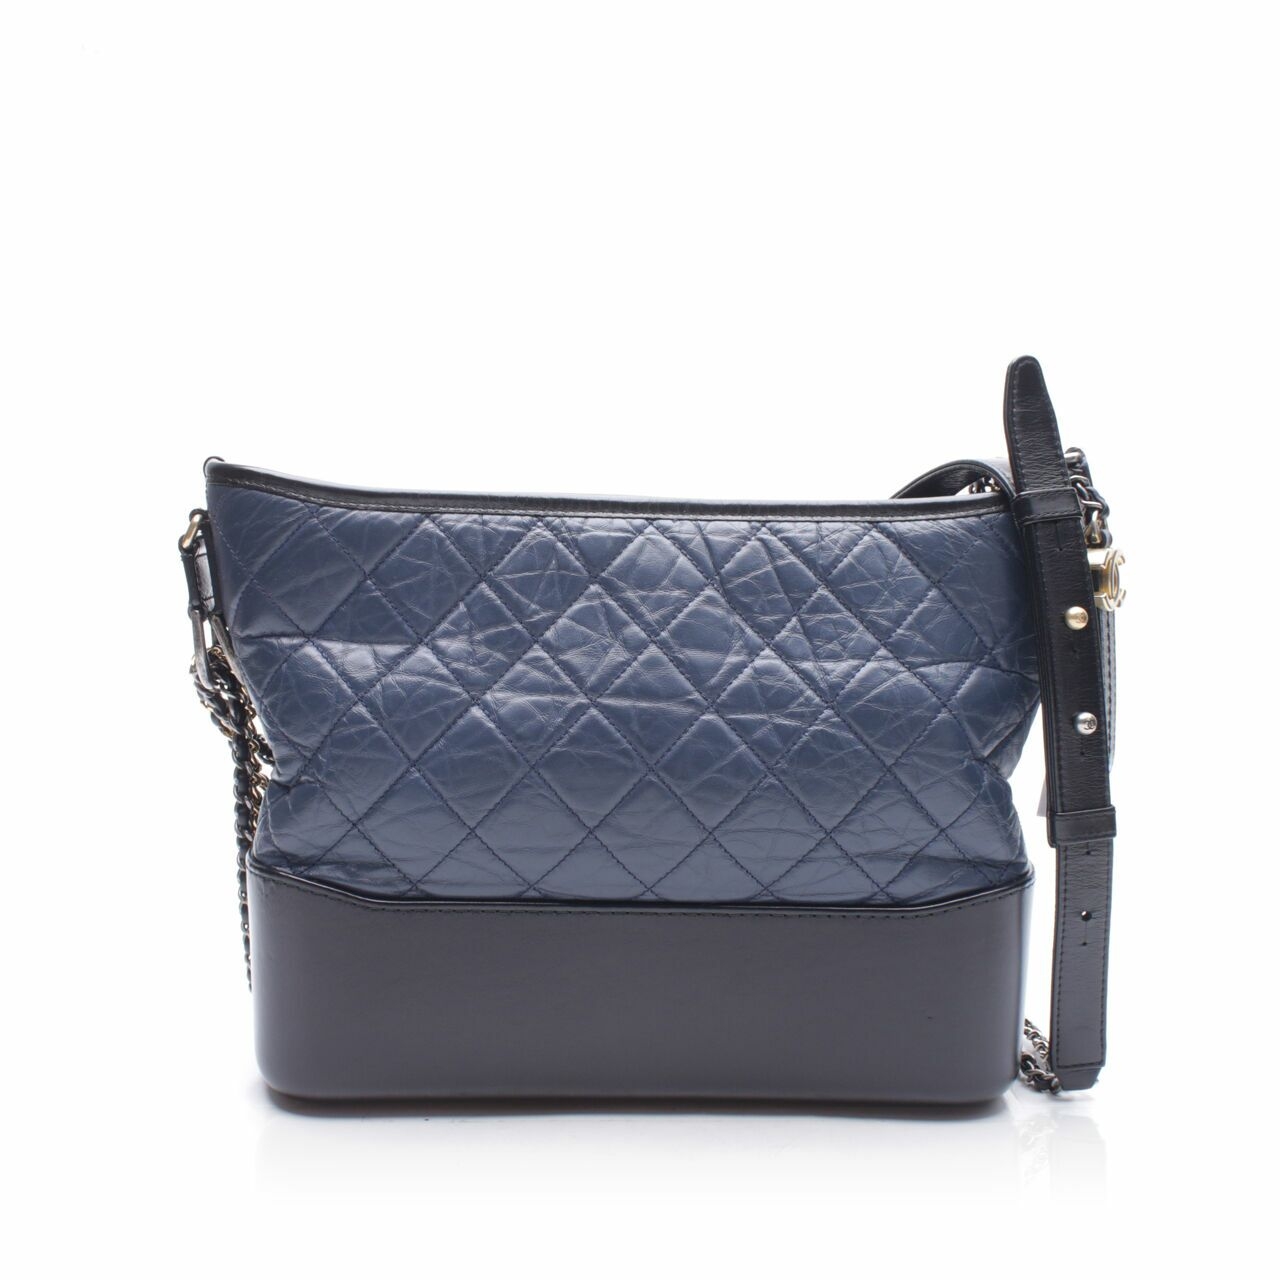 Chanel Gabrielle Hobo Navy/Black with Mixed Hardware Shoulder Bag